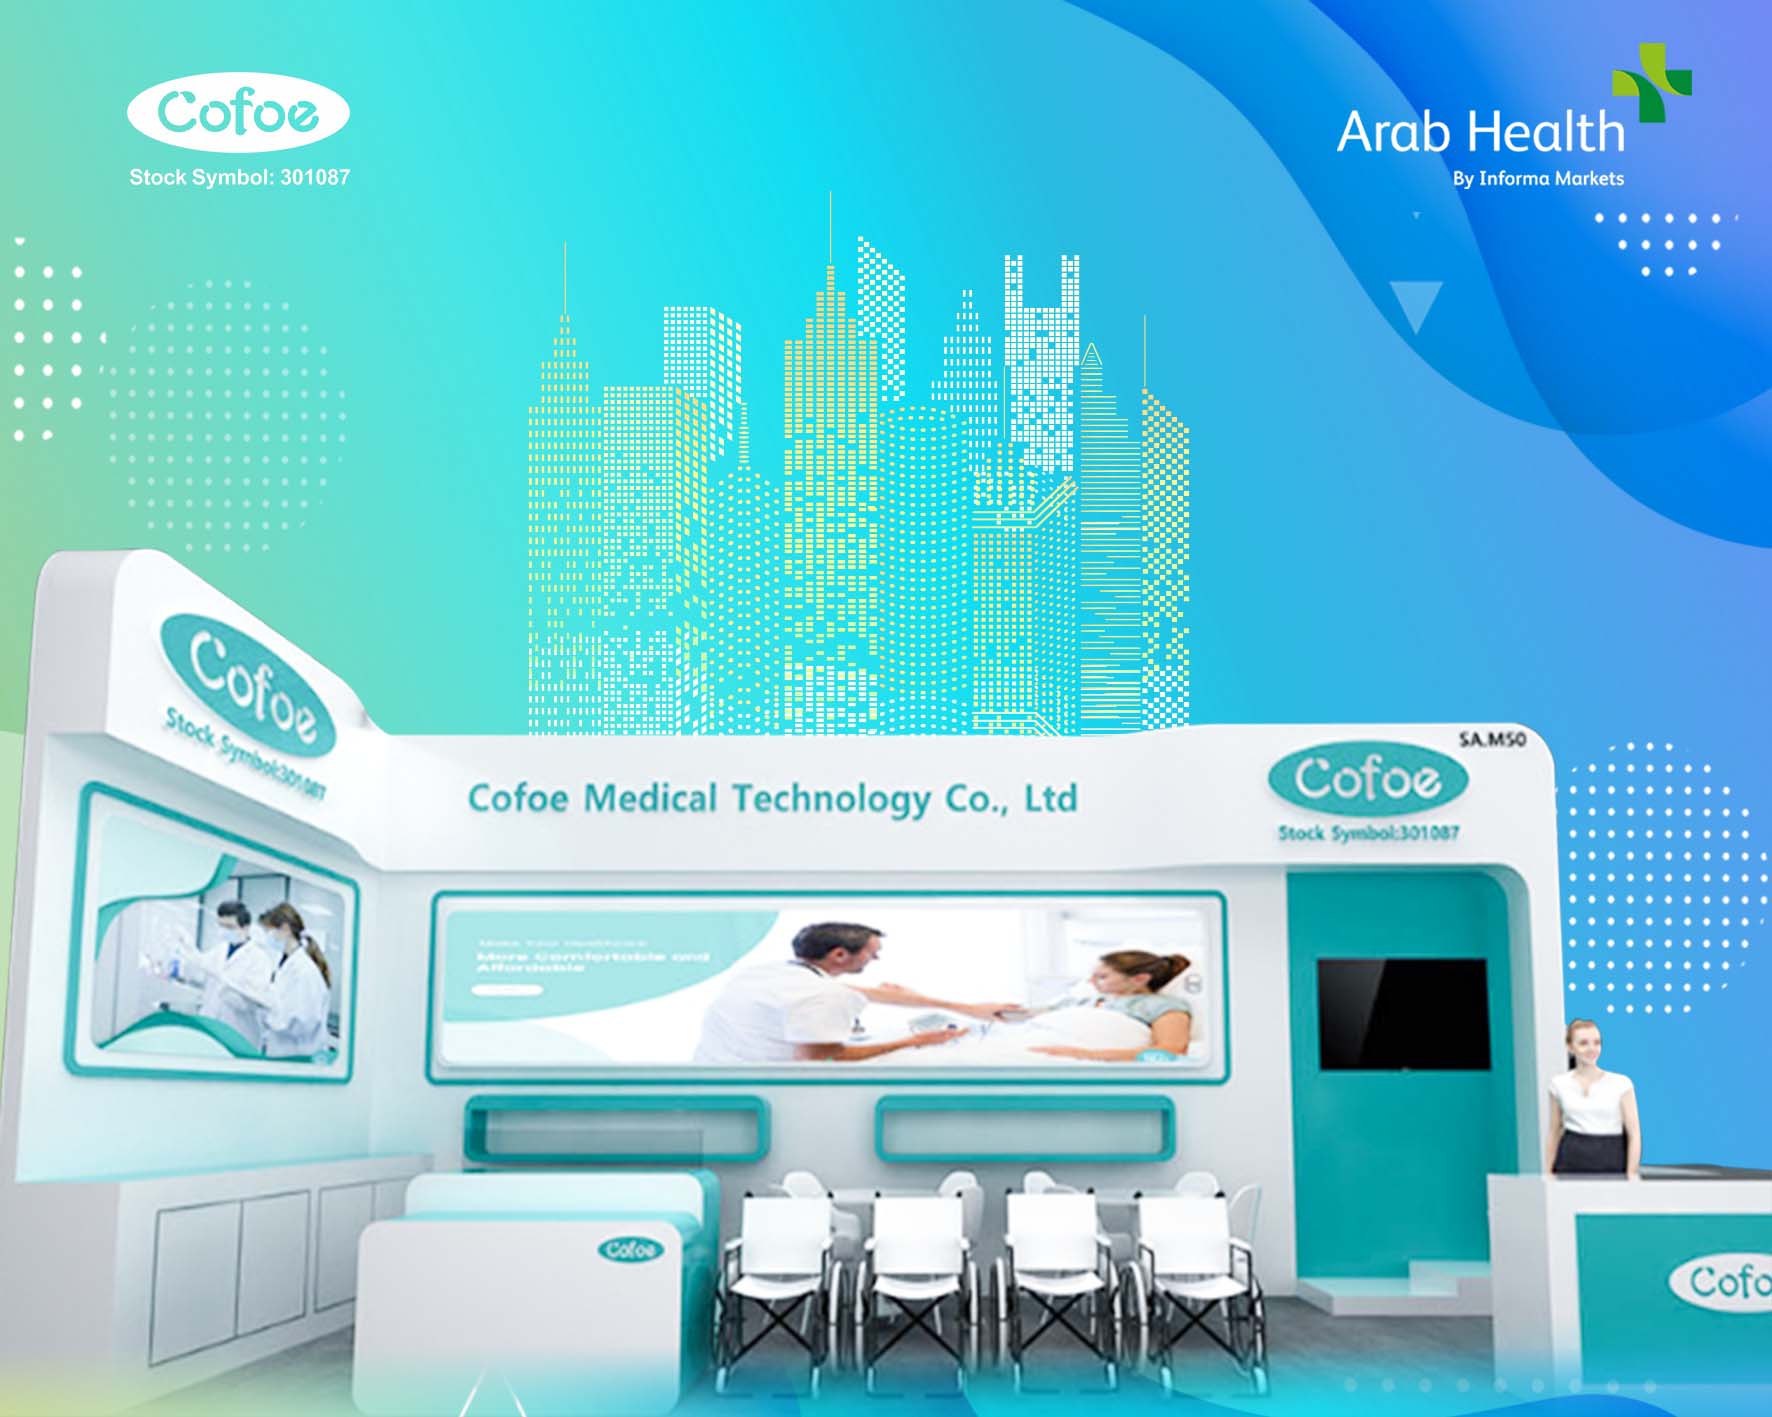 Cofoe Medical attended the 48th Arab Health Exhibition